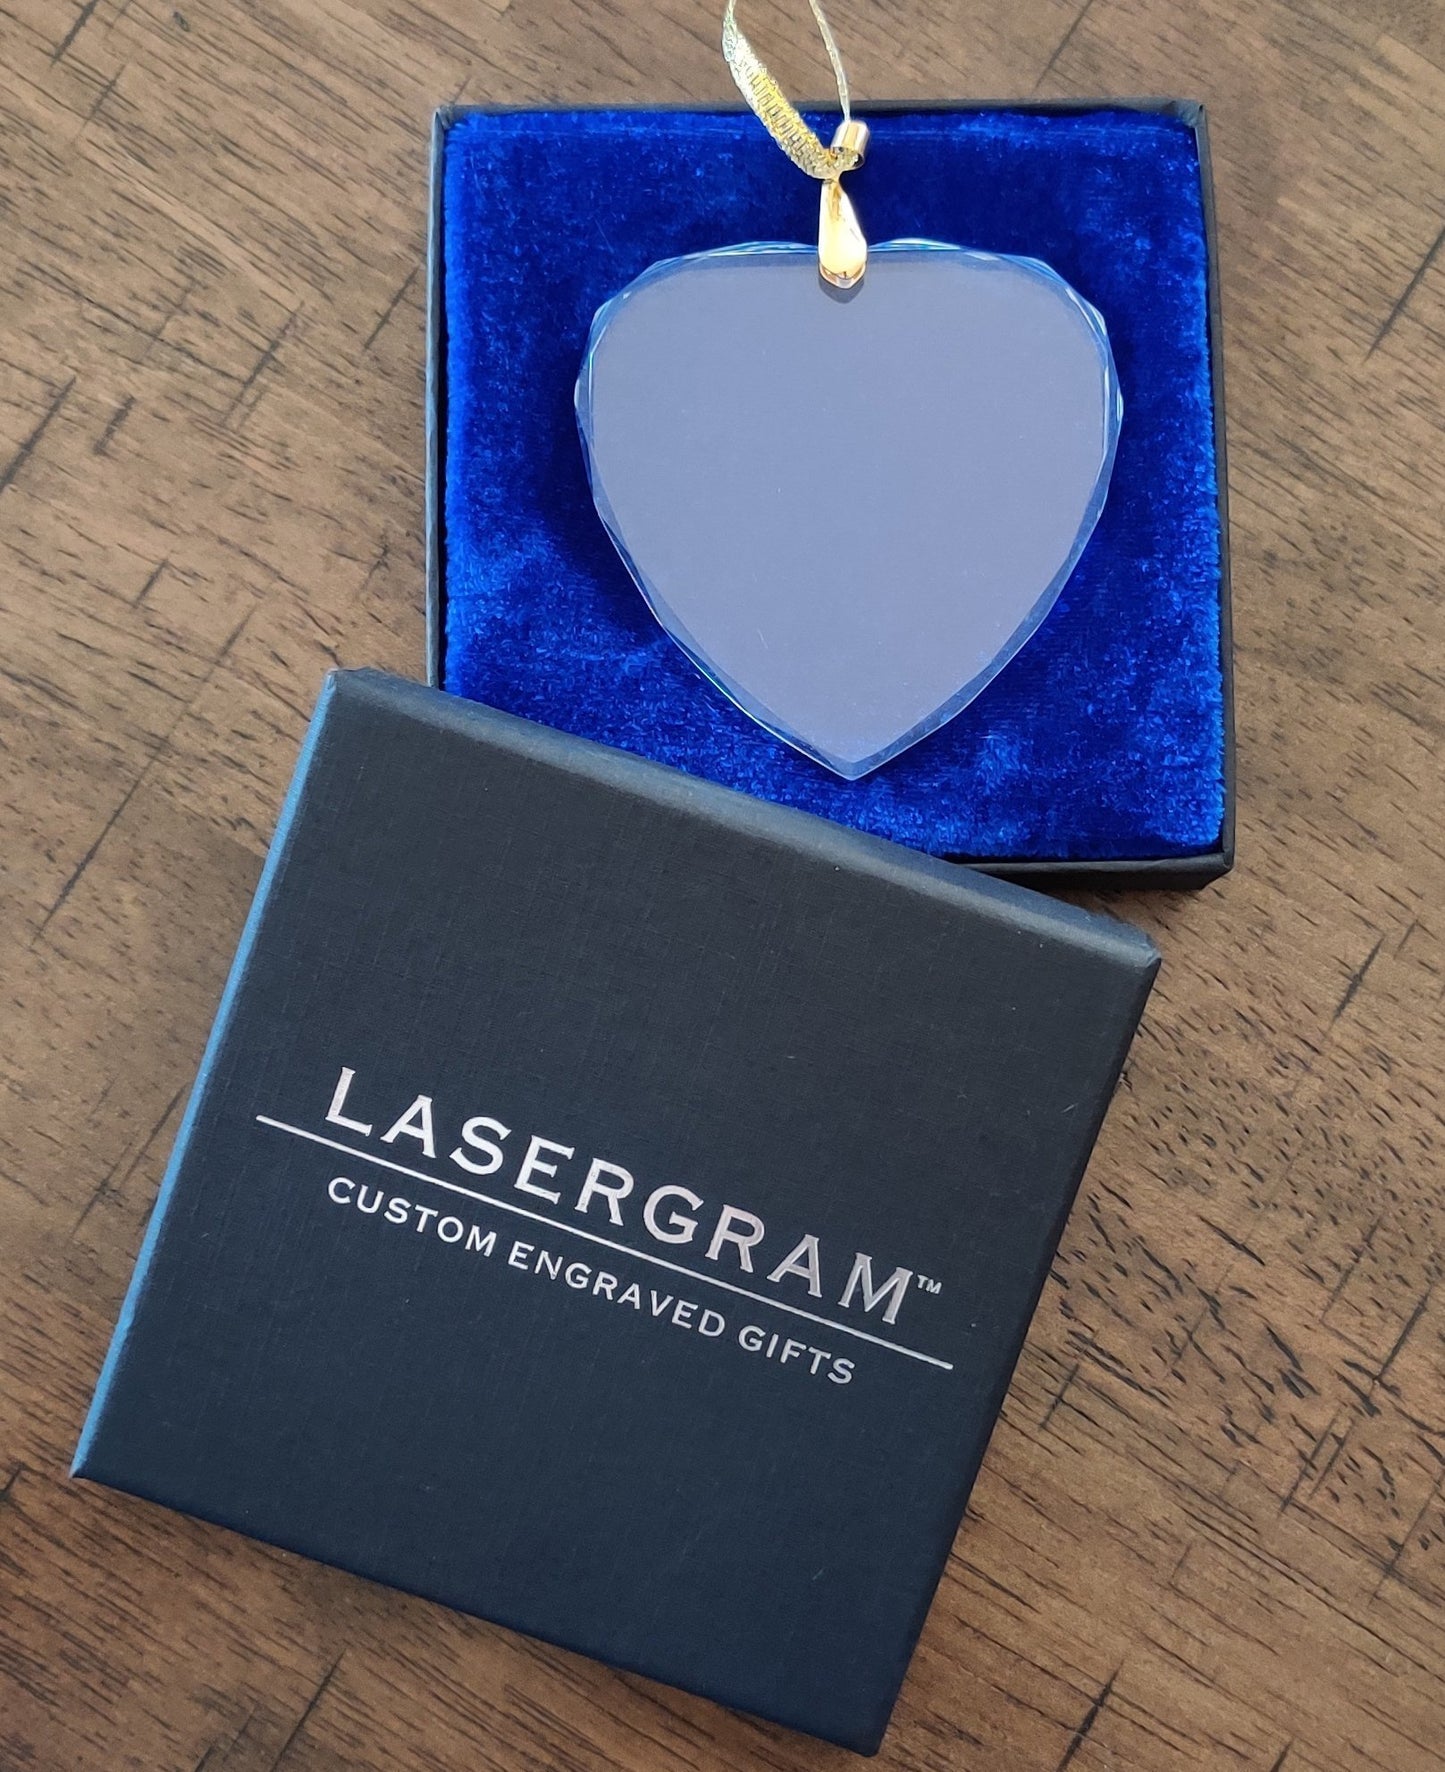 LaserGram Christmas Ornament, Virgen de Guadalupe, Personalized Engraving Included (Heart Shape)